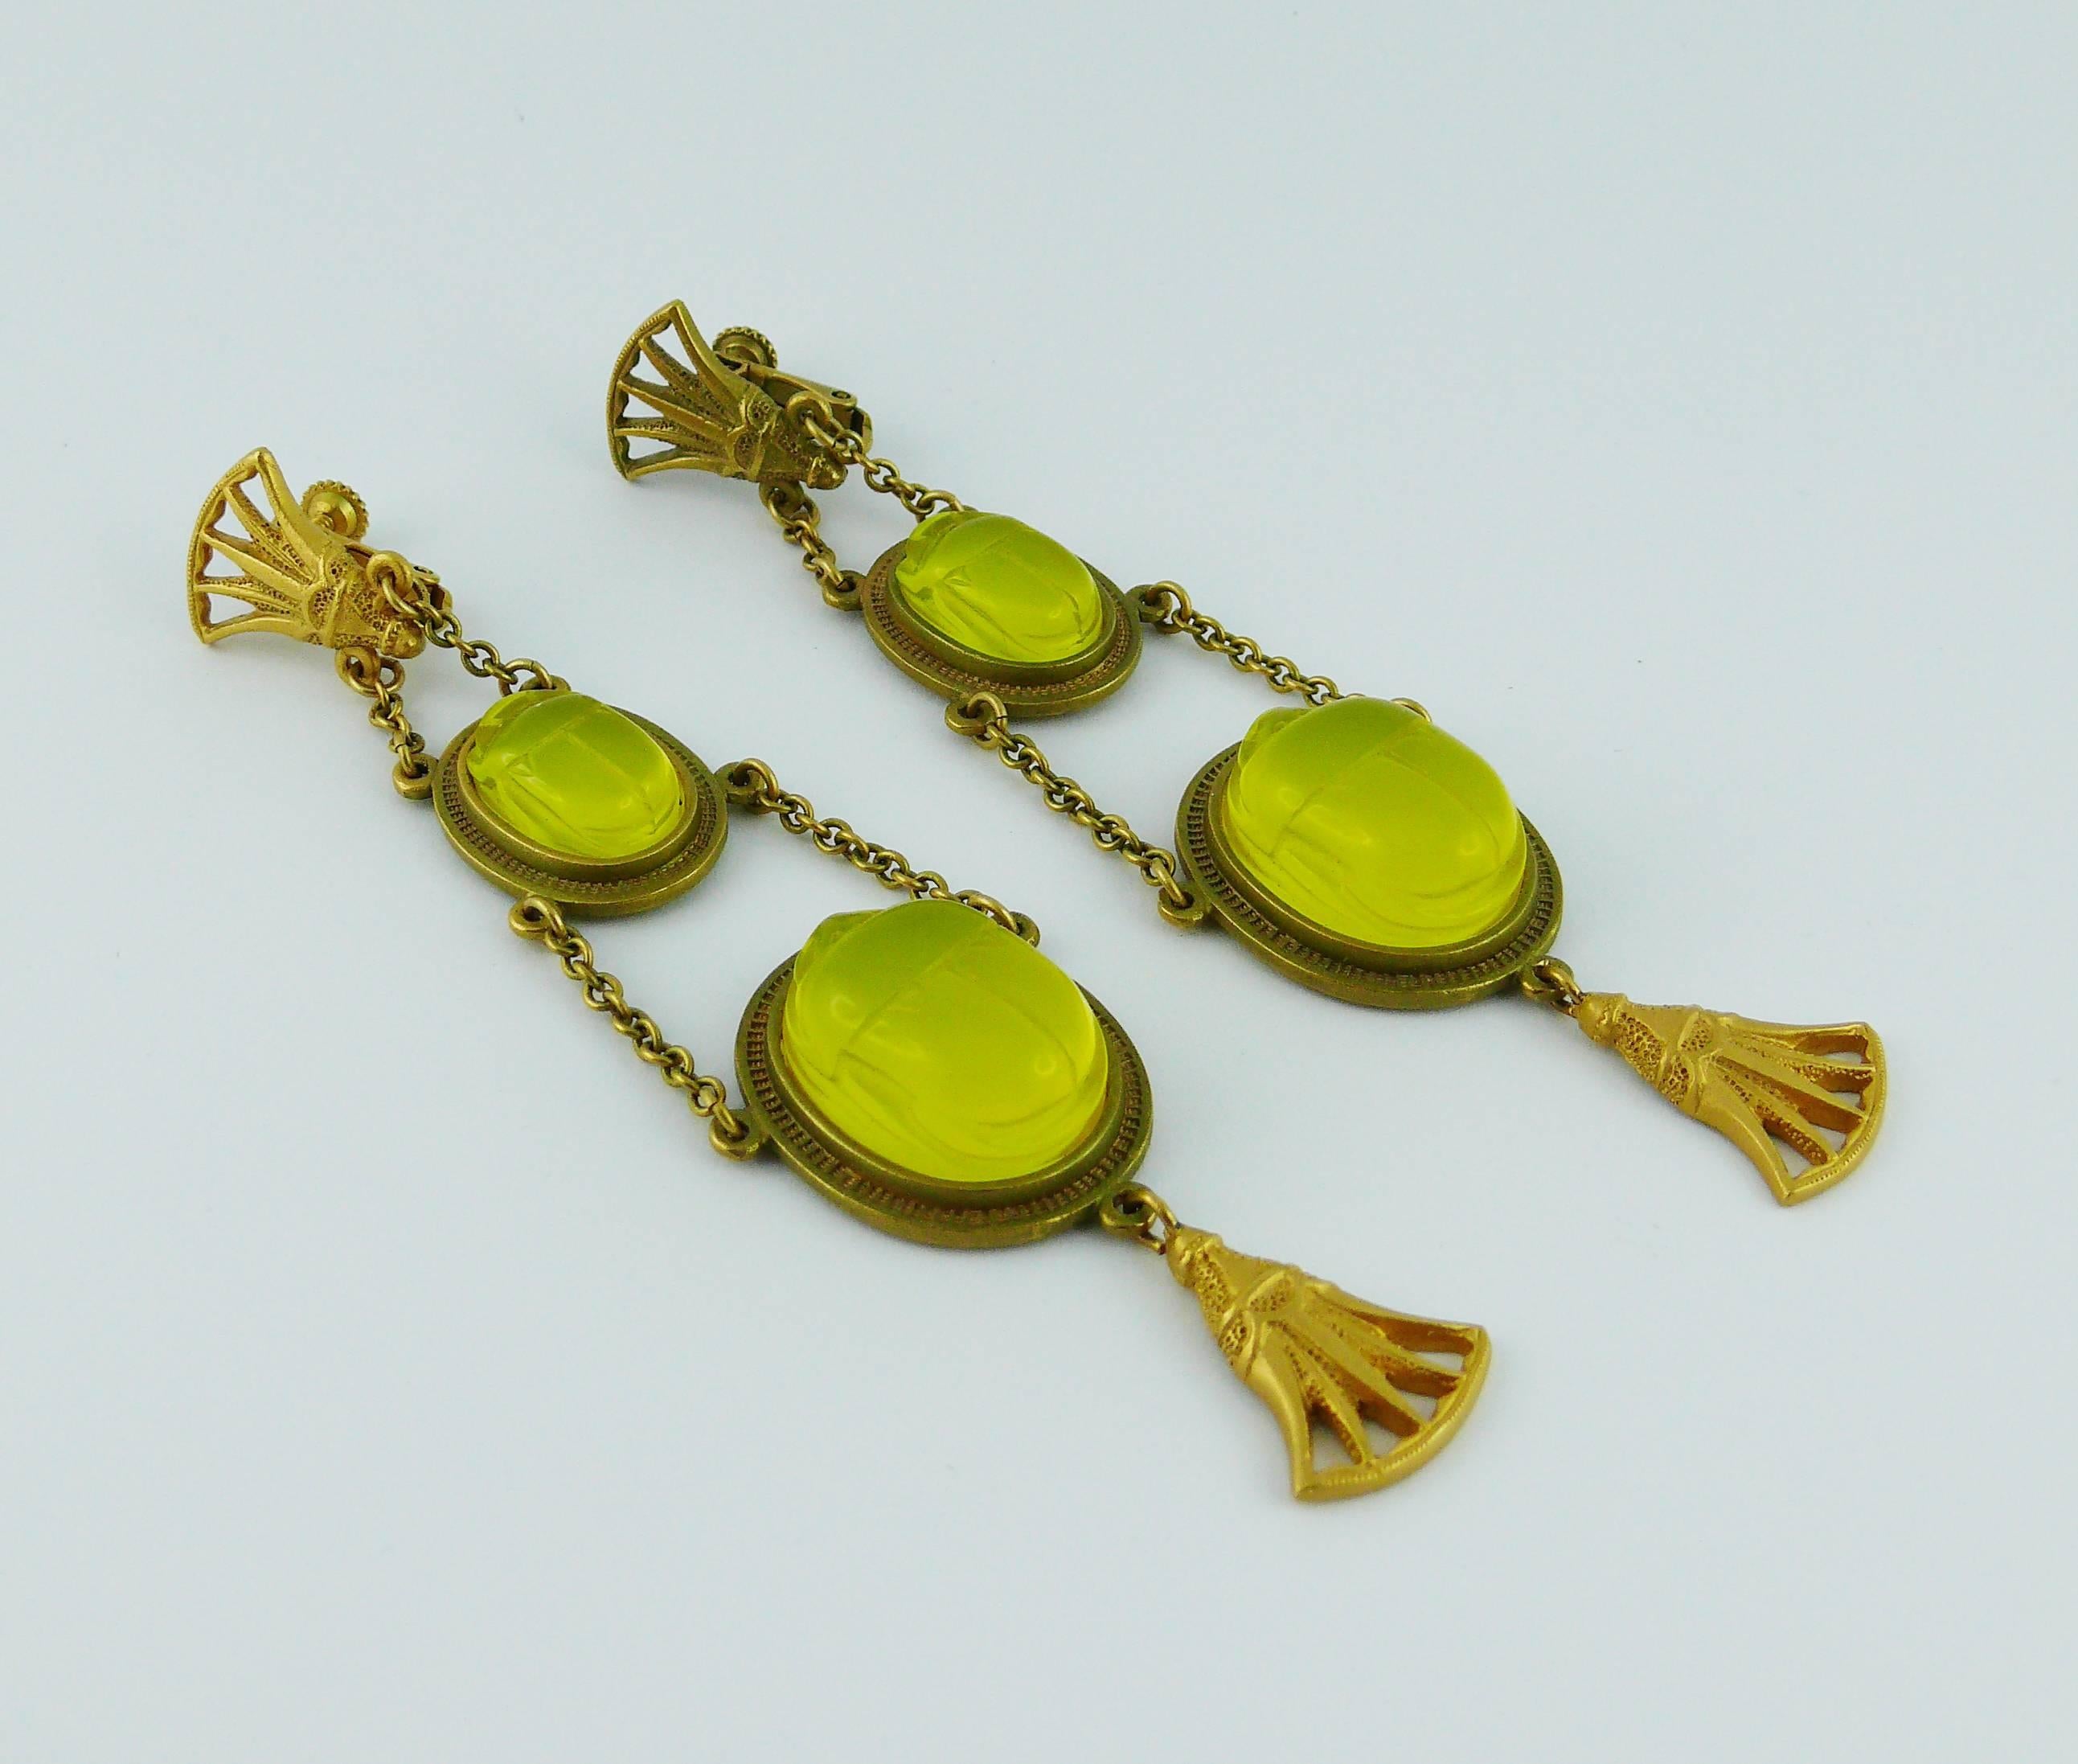 CHRSITIAN DIOR by JOHN GALLIANO Egyptian revival dangle earrings (clip-on) featuring antique ornaments and lucite scarabs in a matte gold tone setting.

The scarabs are an irridescent yellow/lime which changes in different light and upon